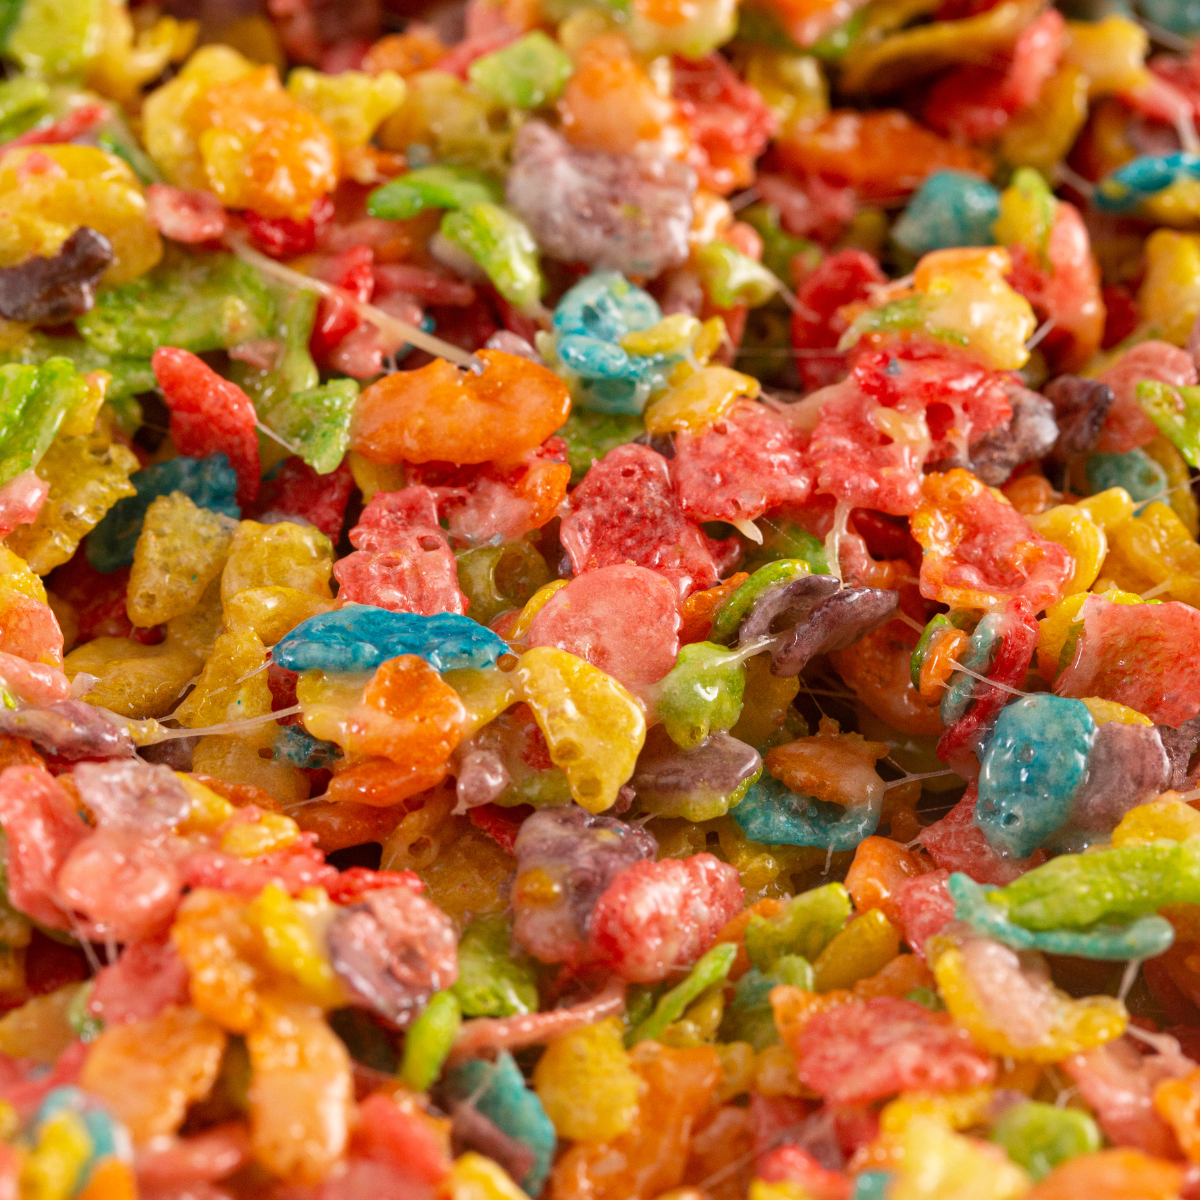 Ingredients Needed For Air Fryer Fruity Pebbles French Toast